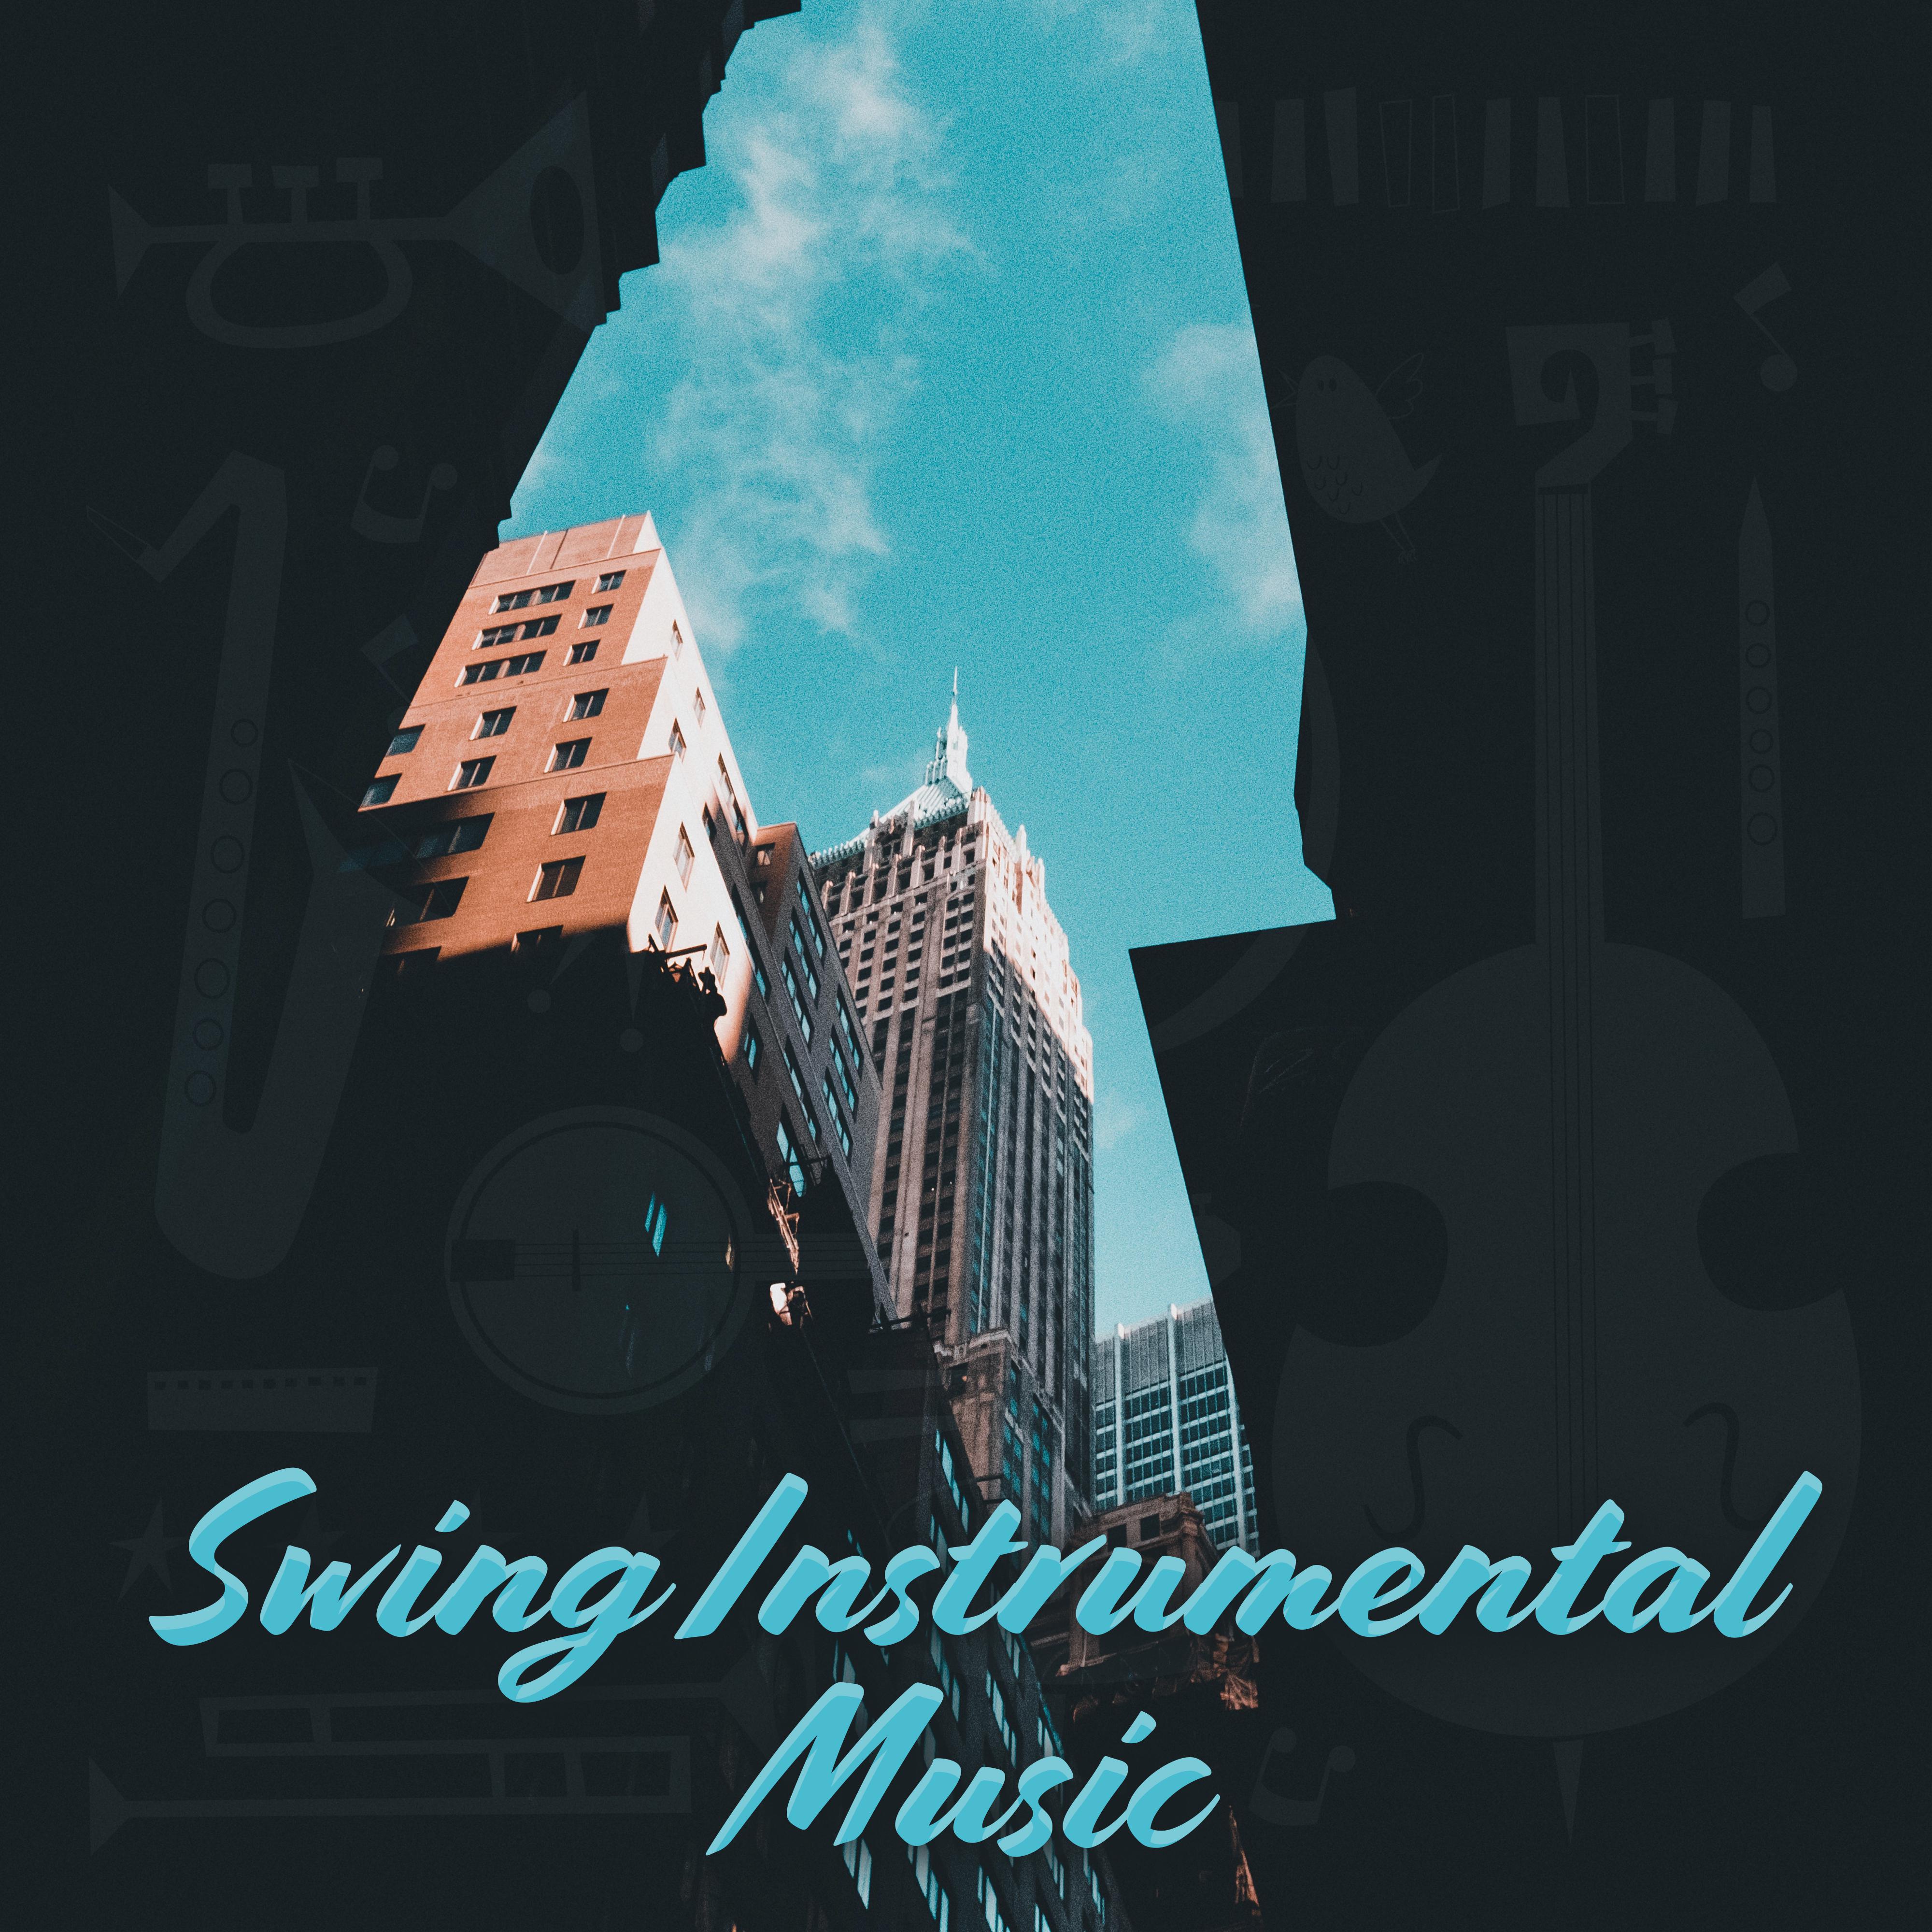 Swing Instrumental Music: Slow, Light and Pleasant Jazz Songs 2019